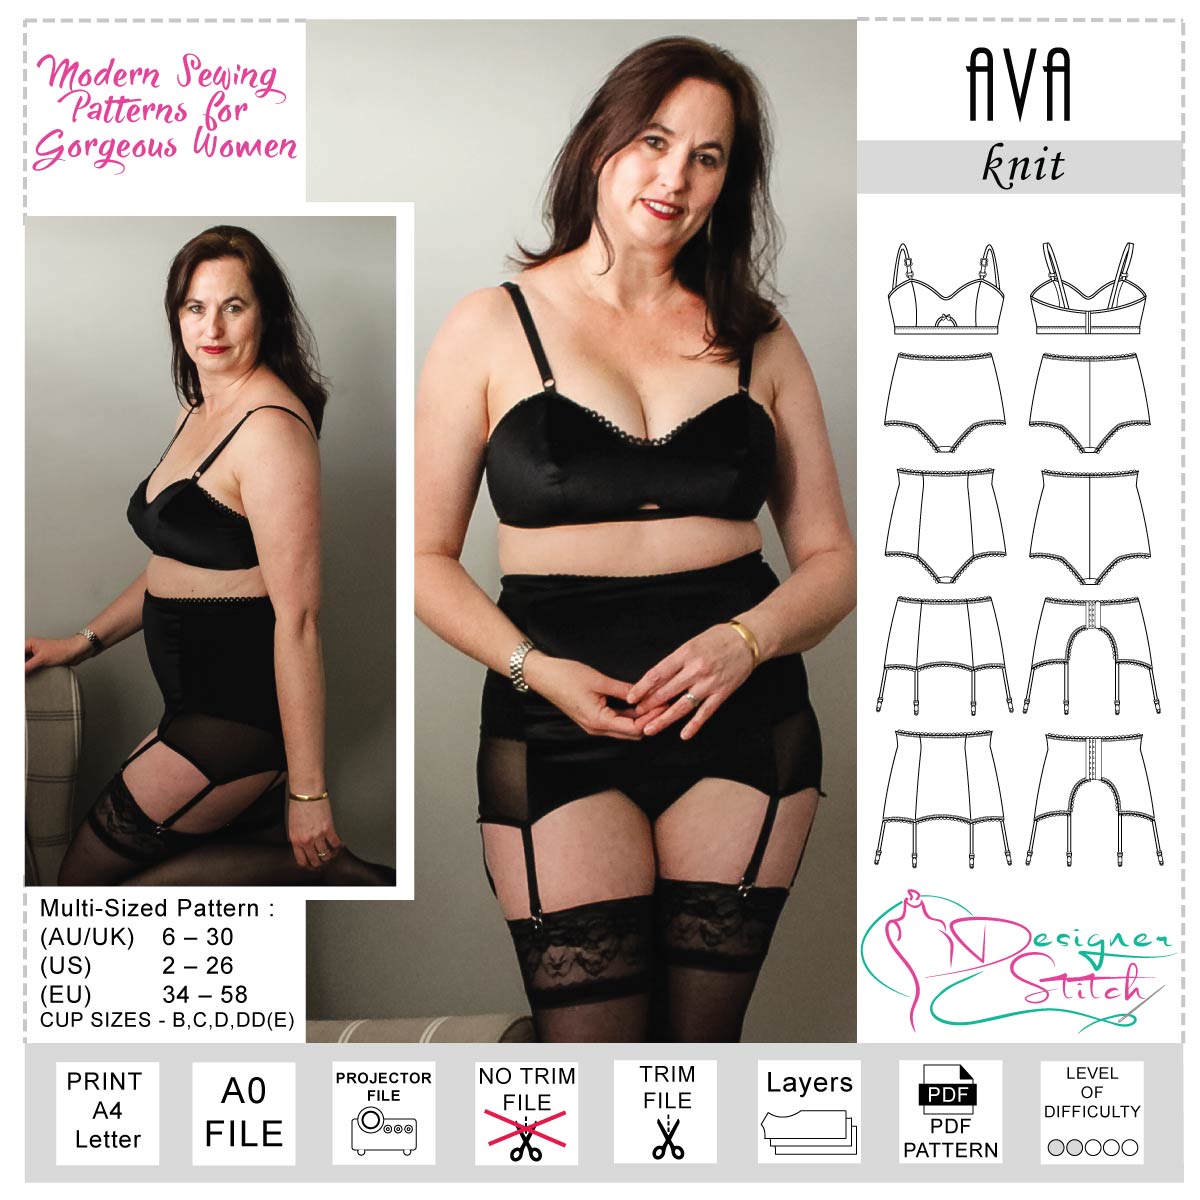 Sew Projects - Lingerie patterns and courses for the home sewer